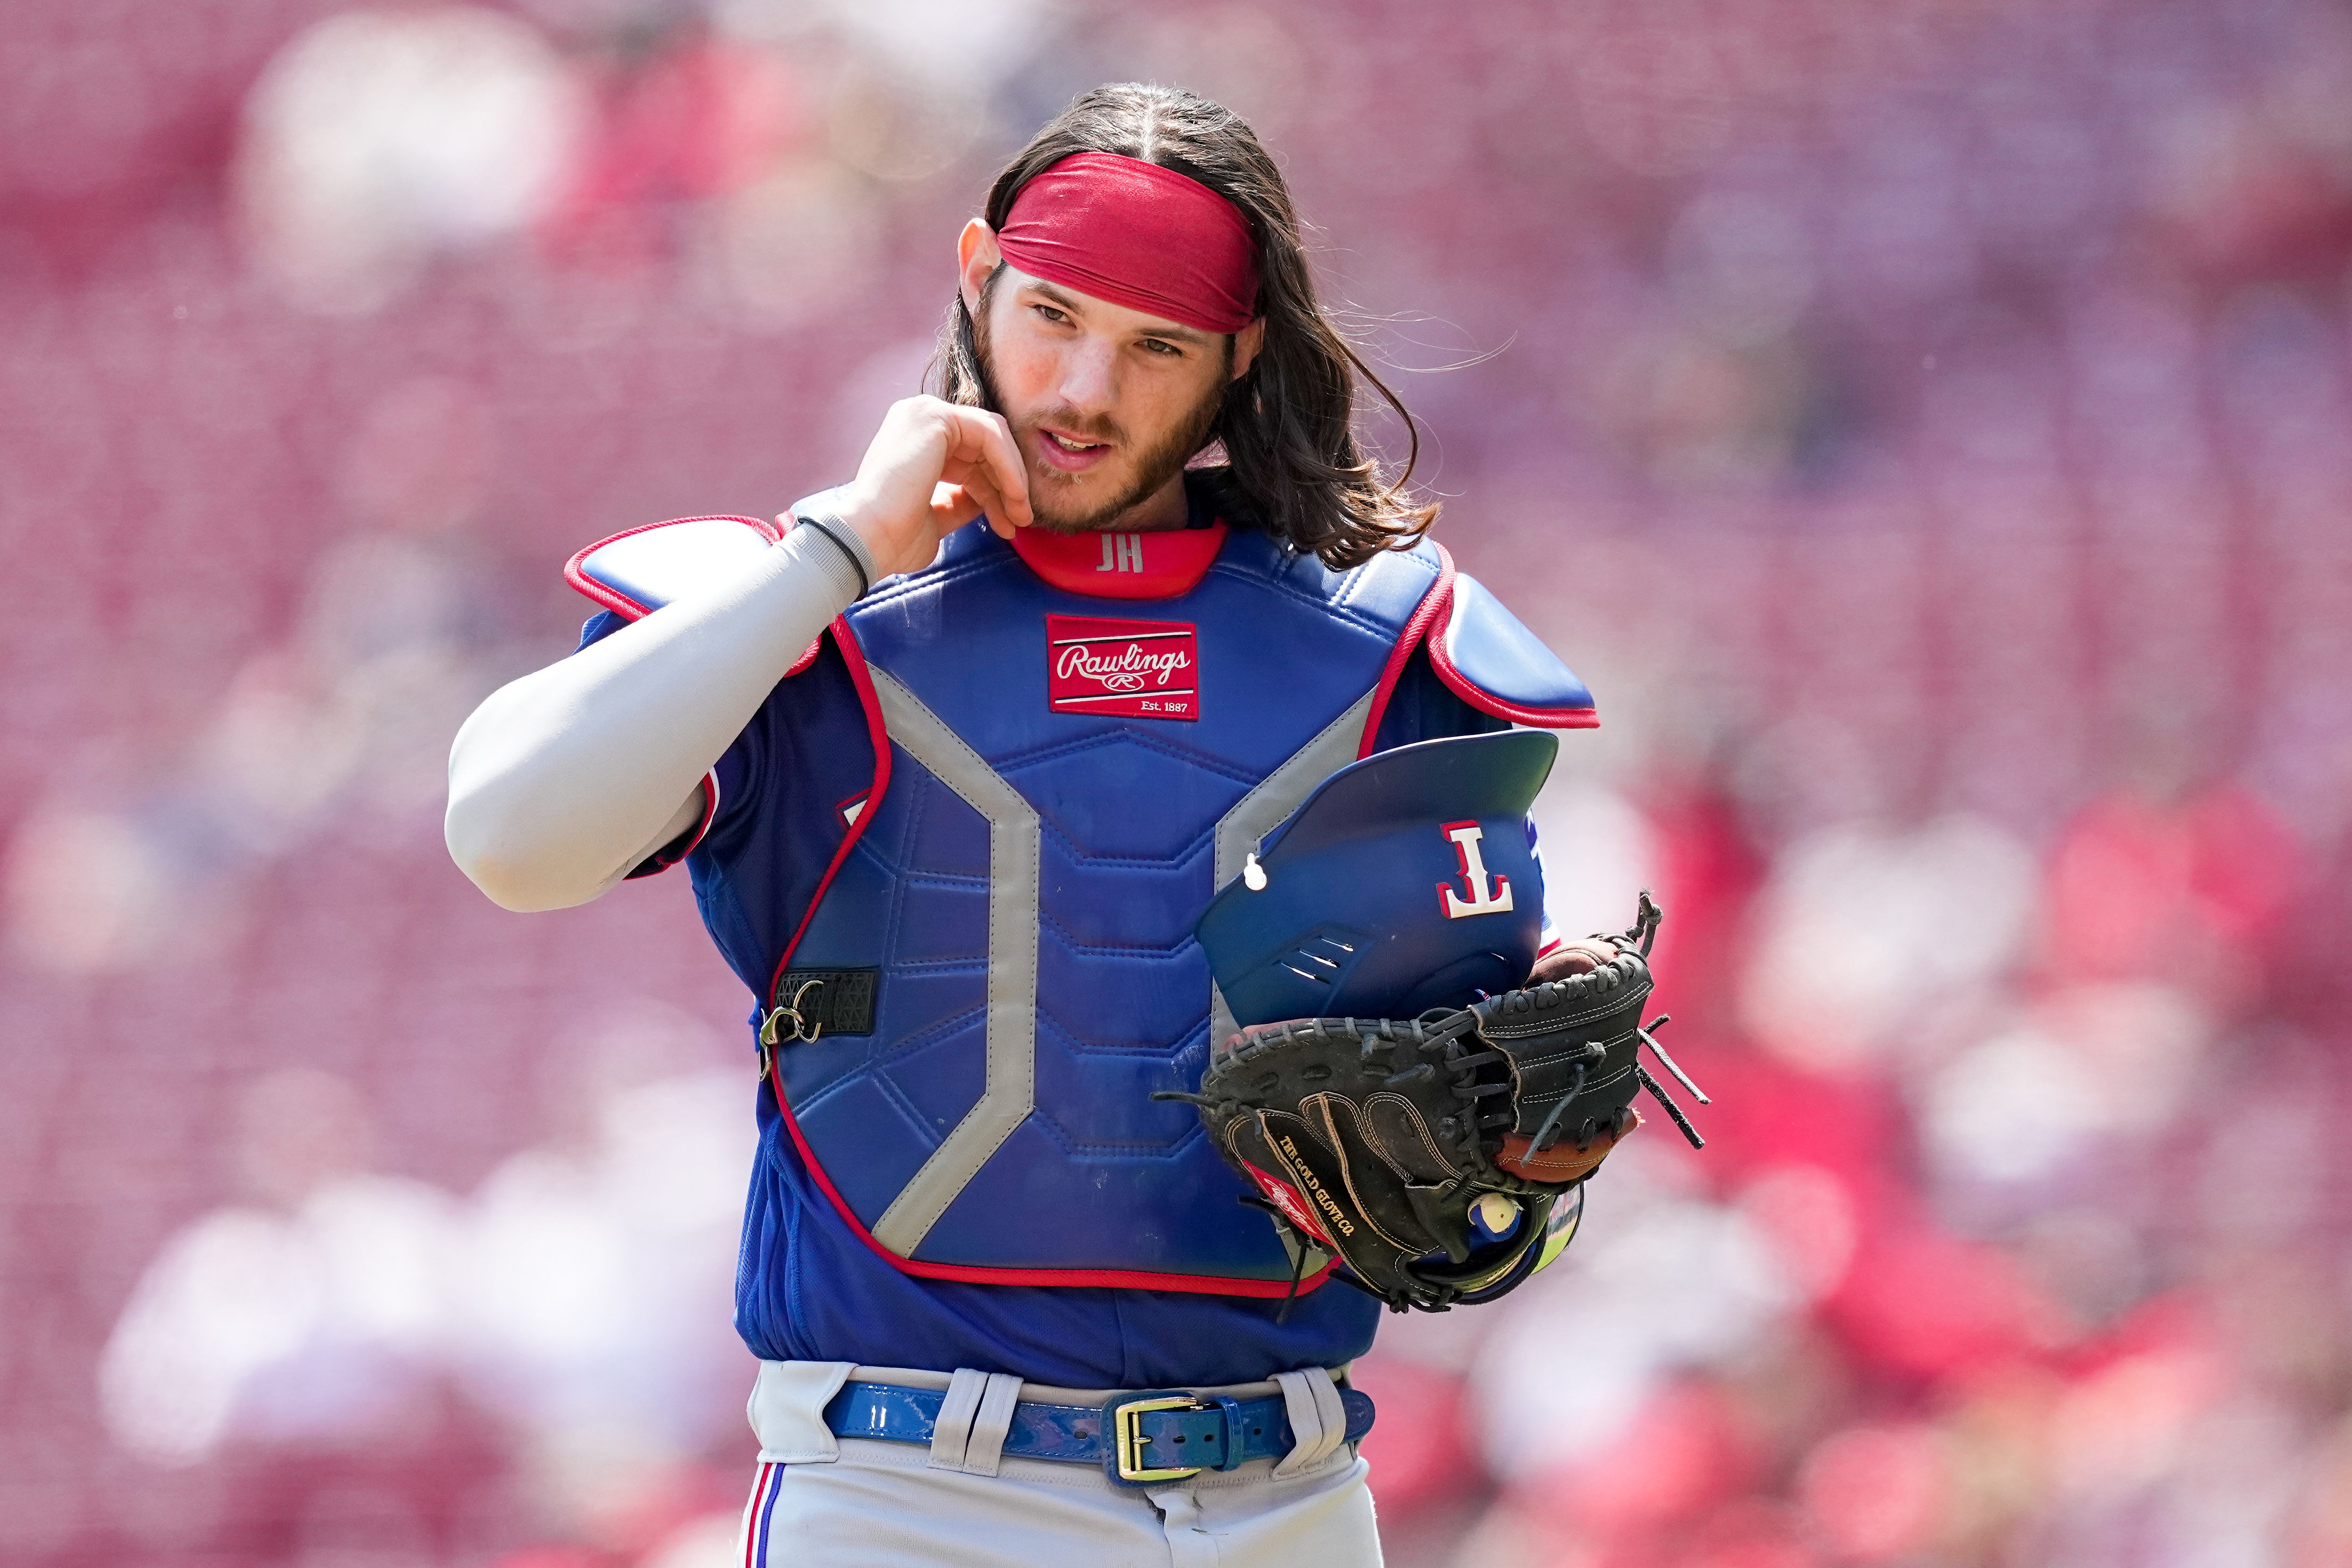 MLB PitchCom Wristbands catchers wear to signal pitches explained